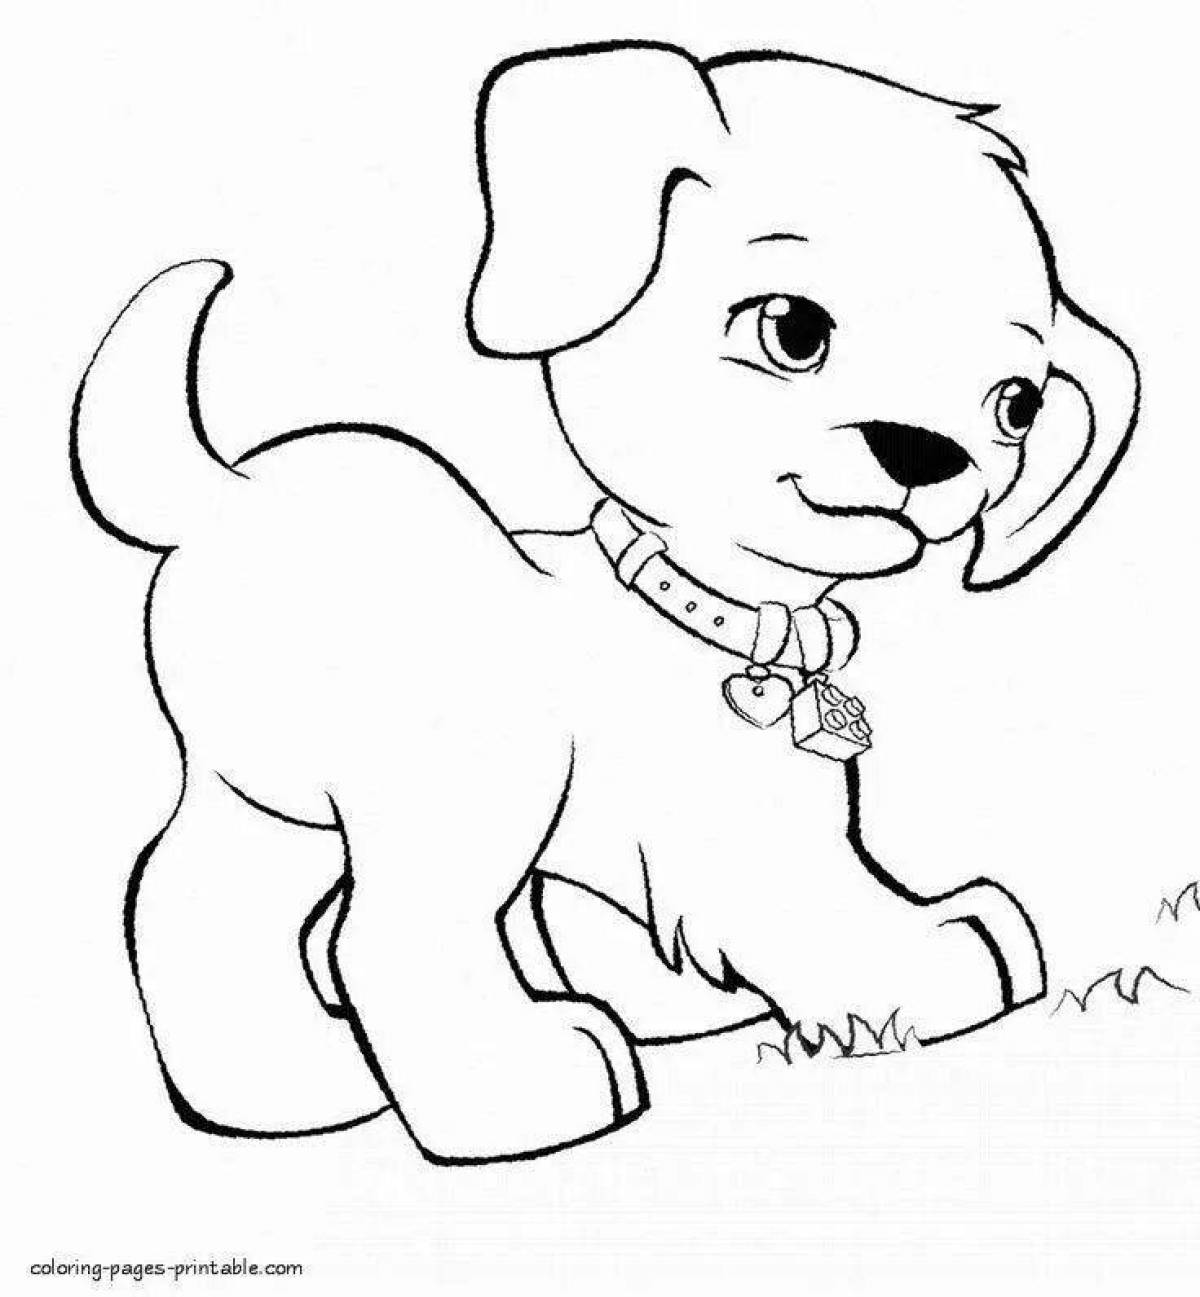 Glowing cats and dogs coloring page